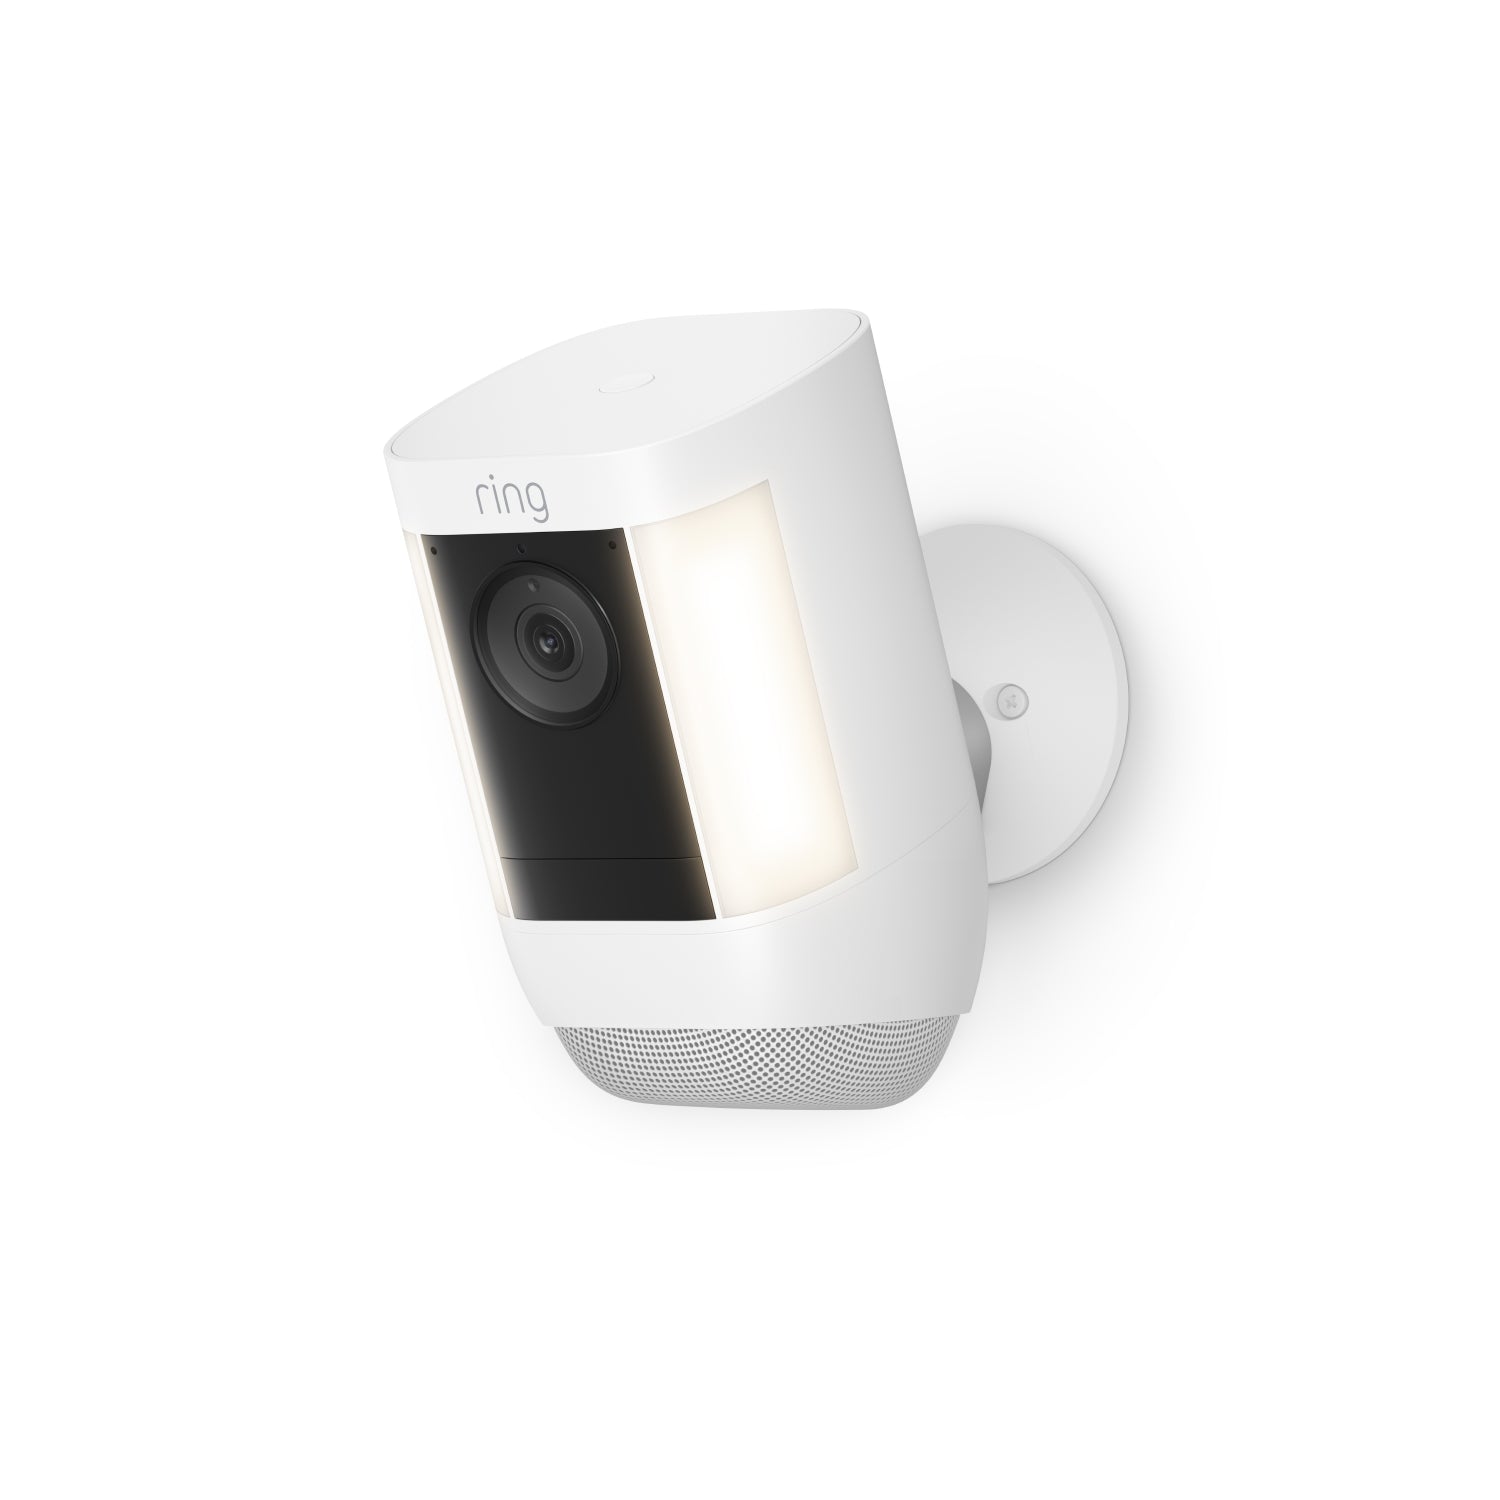 Amazon.com: Ring Solar Security Sign : Amazon Devices & Accessories